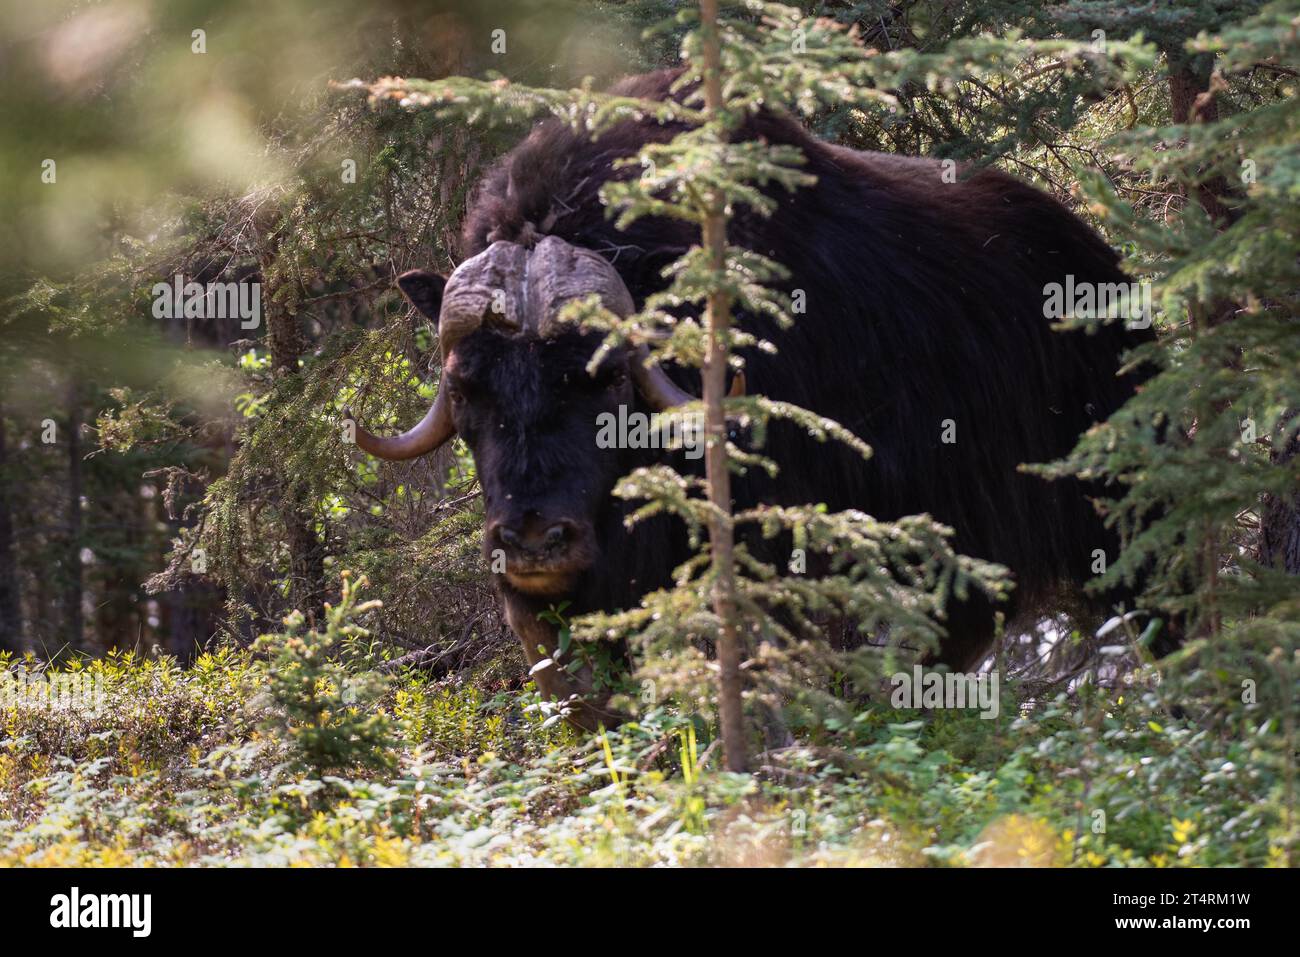 Musk oxen amongst the trees in the forest. Taken in Thaidene Nëné National Park Reserve, Northwest territories, Canada. Close up image. Stock Photo